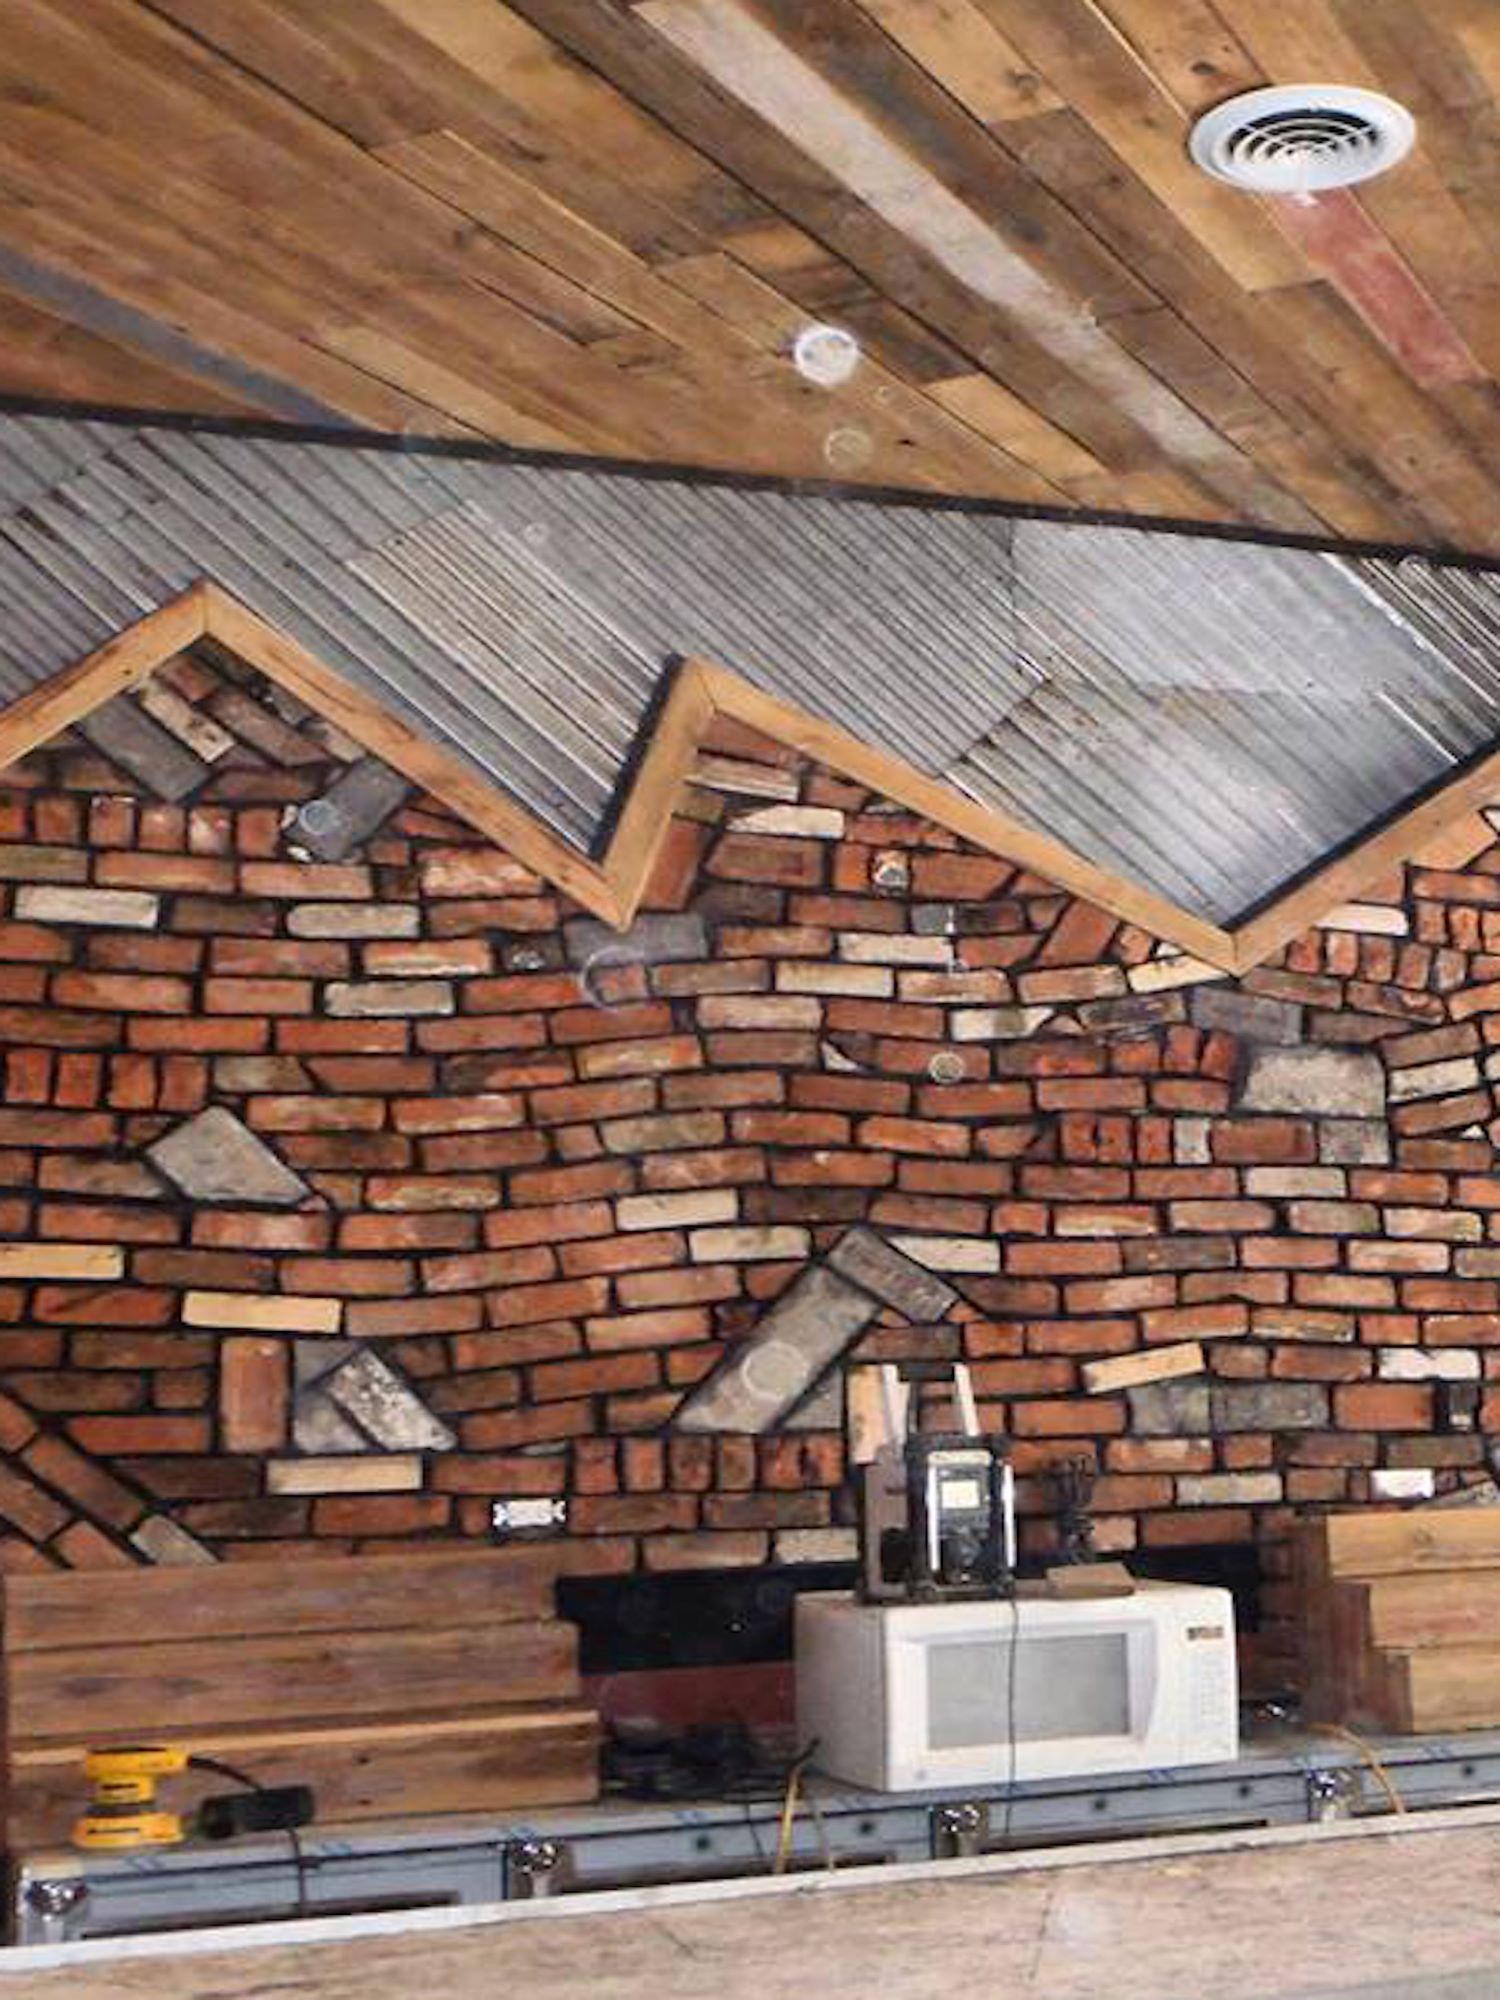 Custom accent wall installed at a local barbeque restaurant